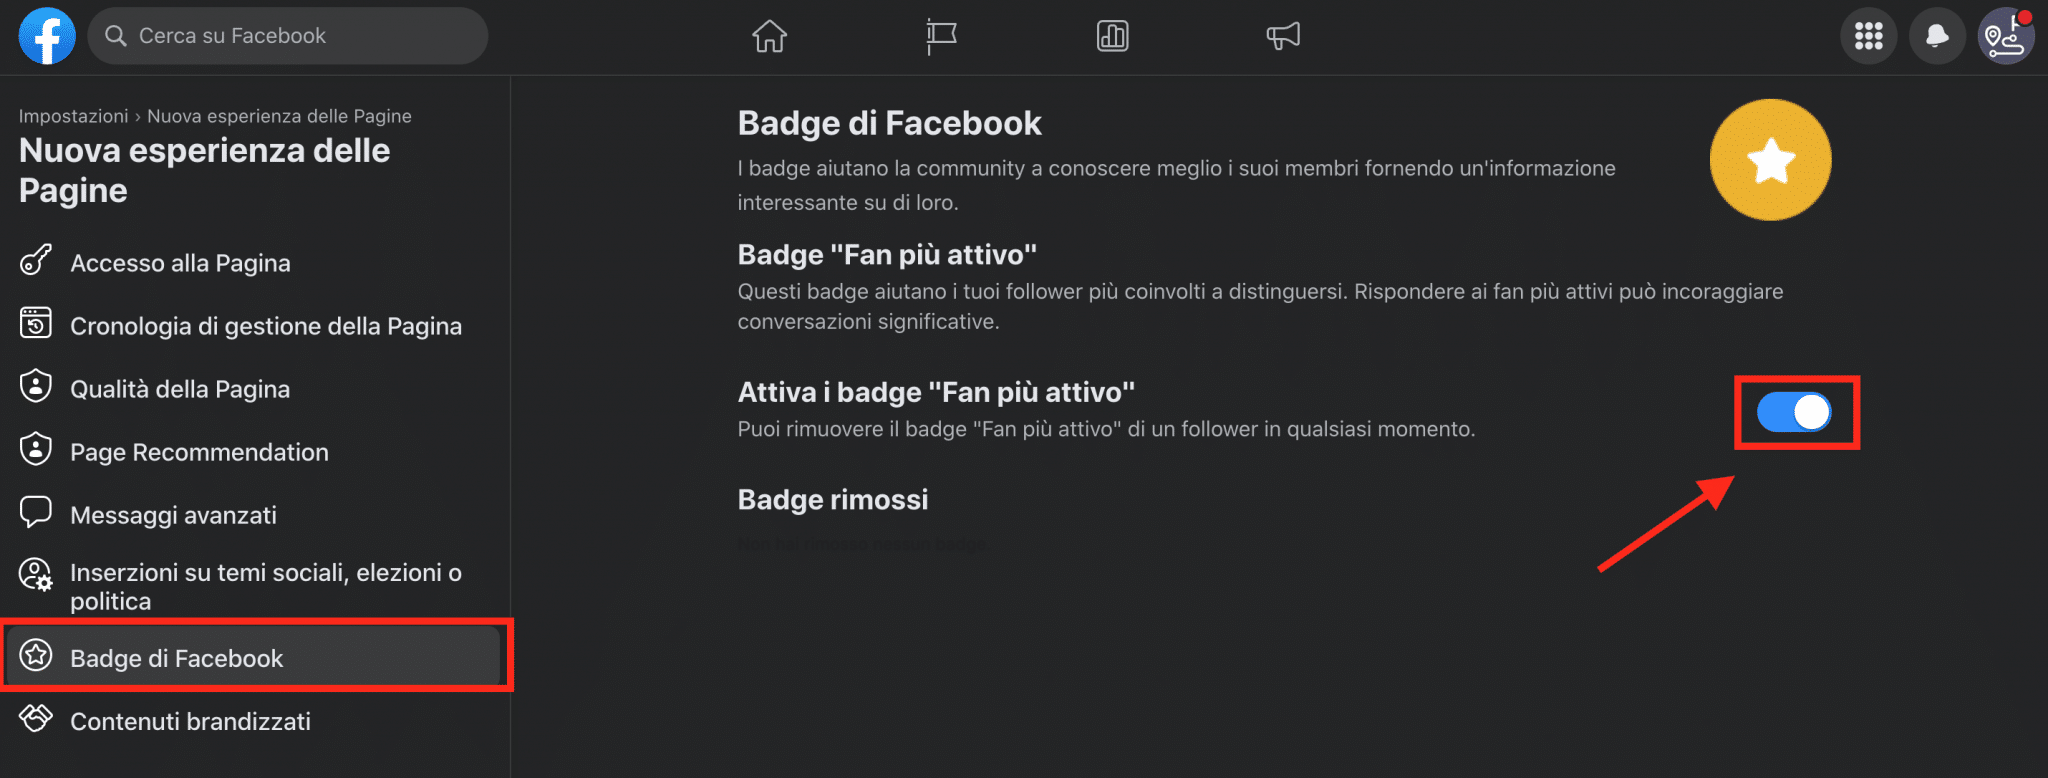 Because of the badge, the more people interact, the more they are rewarded with badges.